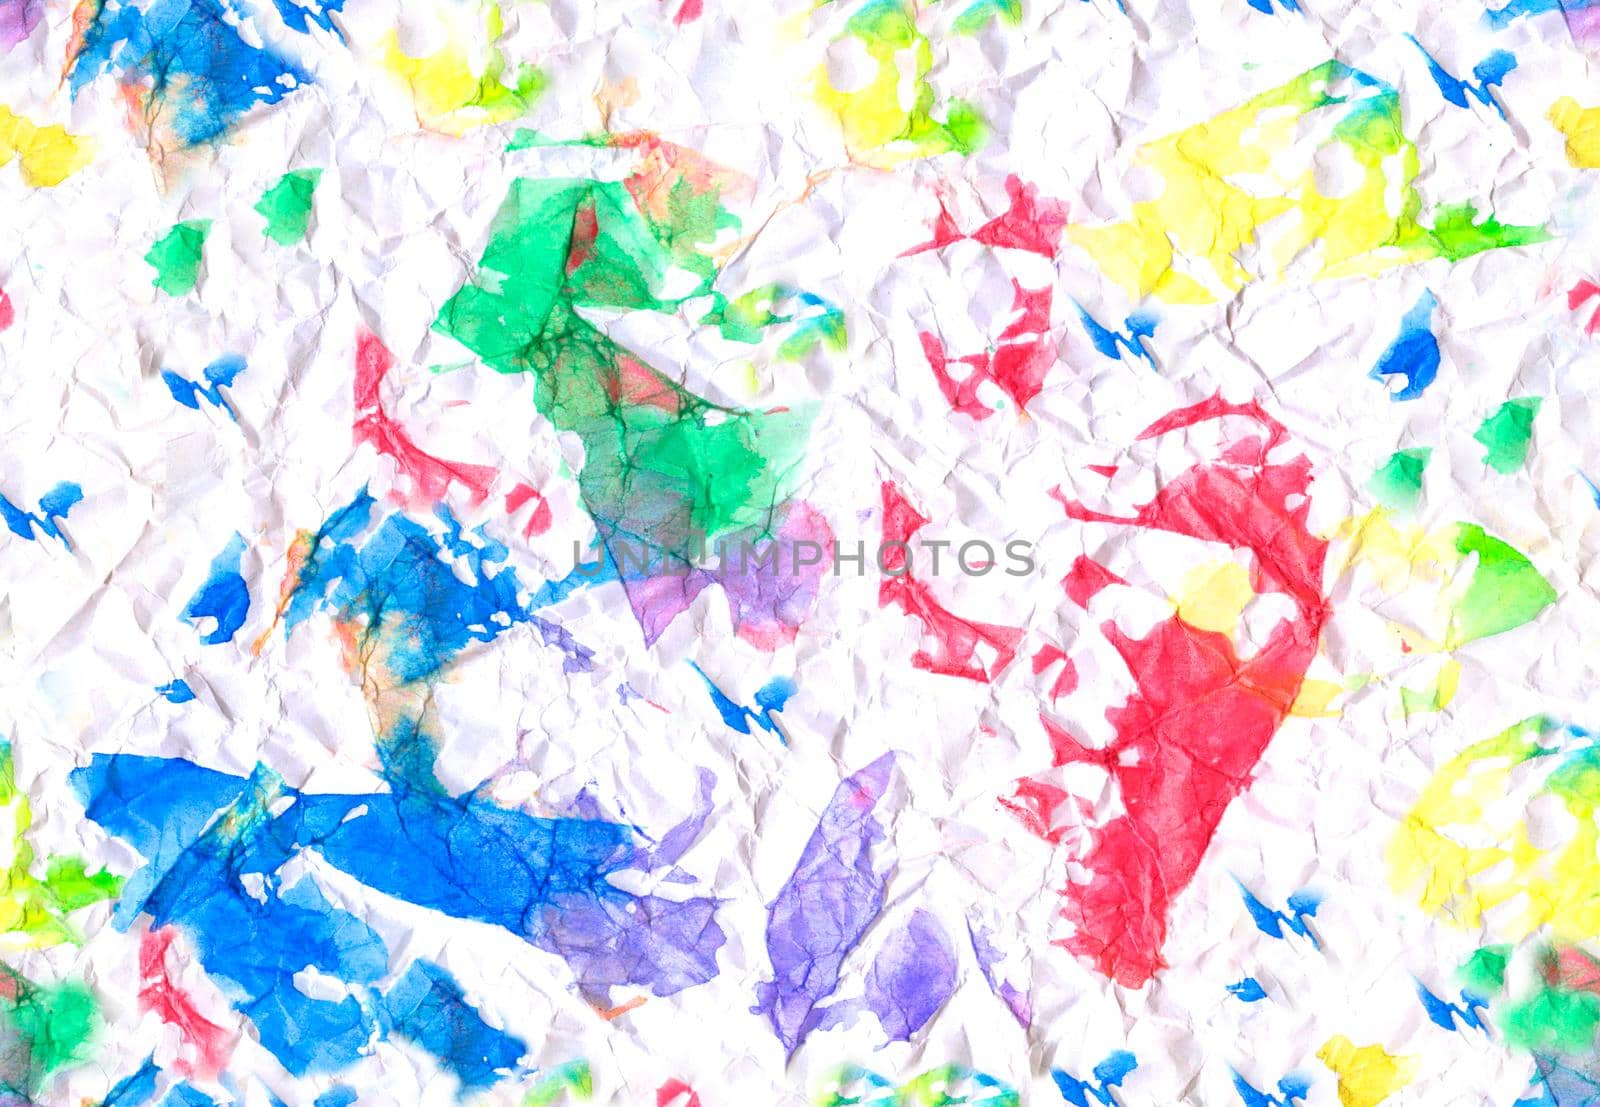 Abstract watercolor background. colorful splashes on rough white background. Hand drawn illustration by fireFLYart